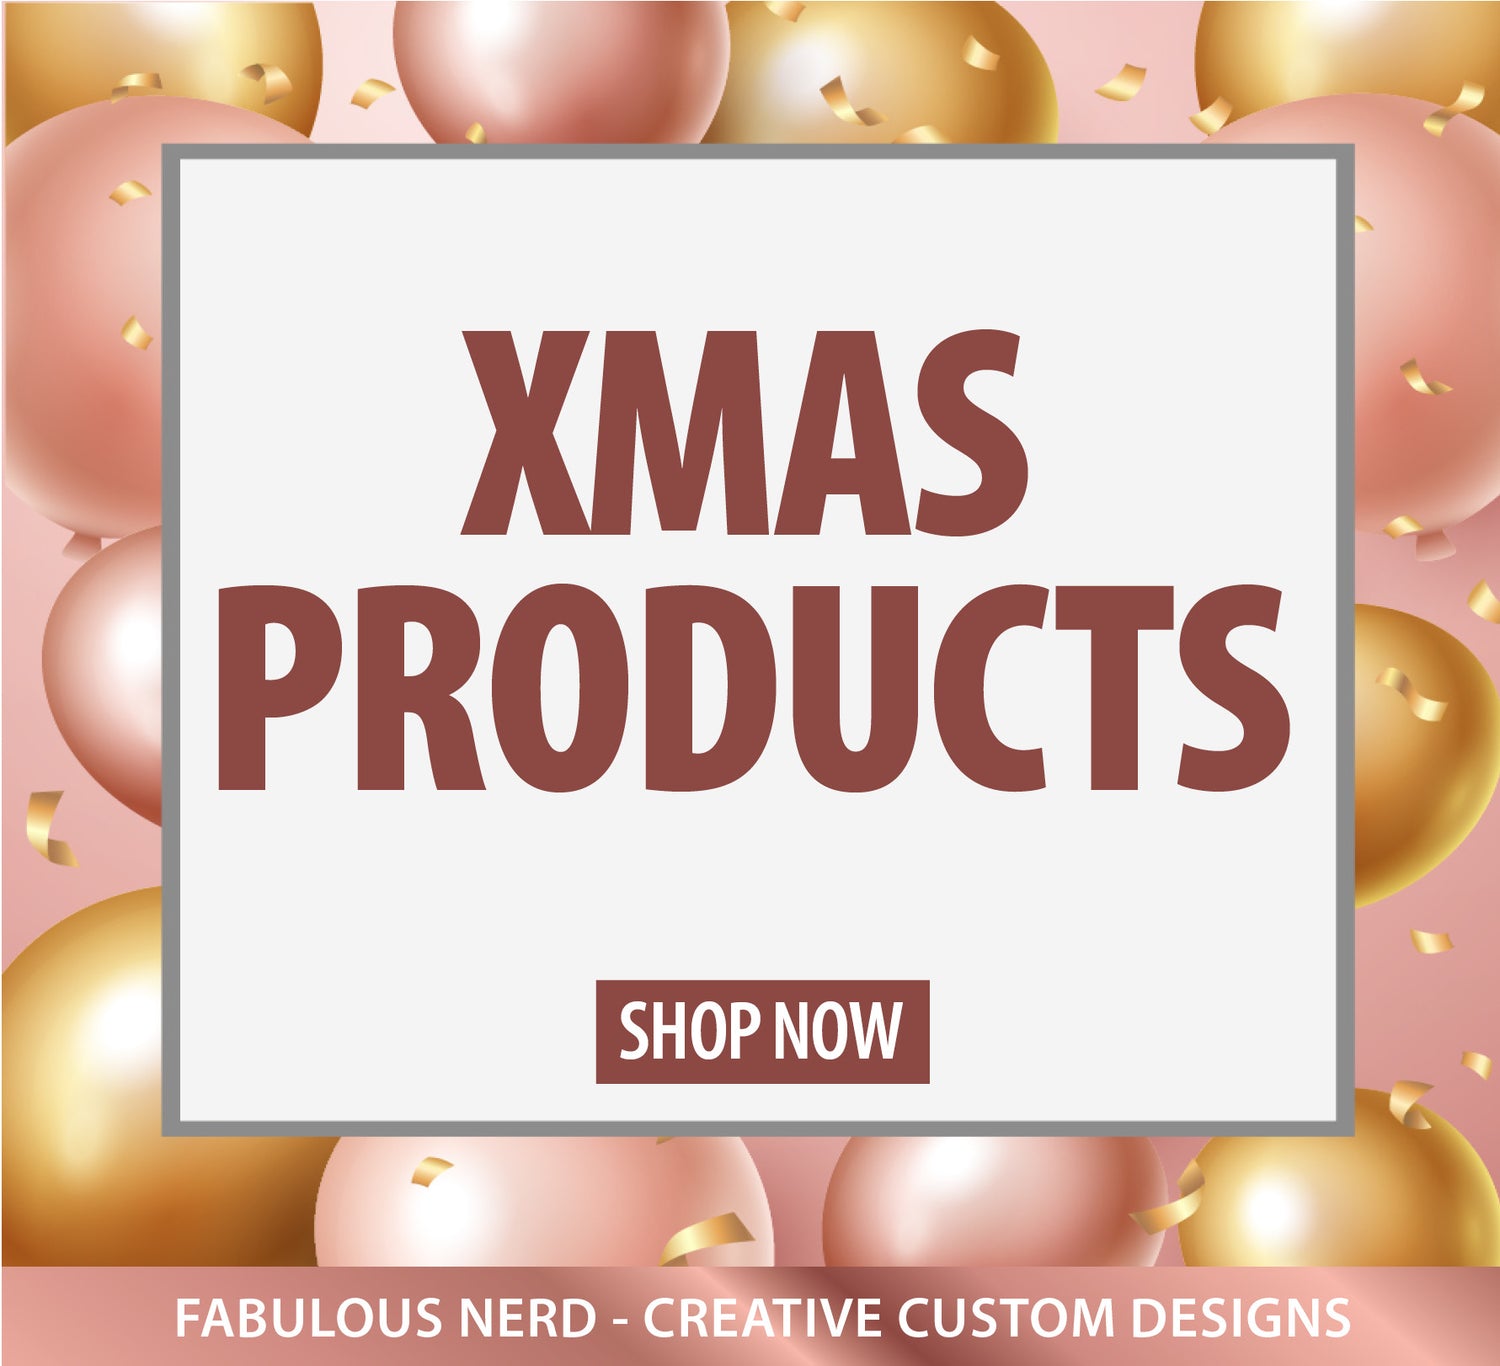 XMAS PRODUCTS